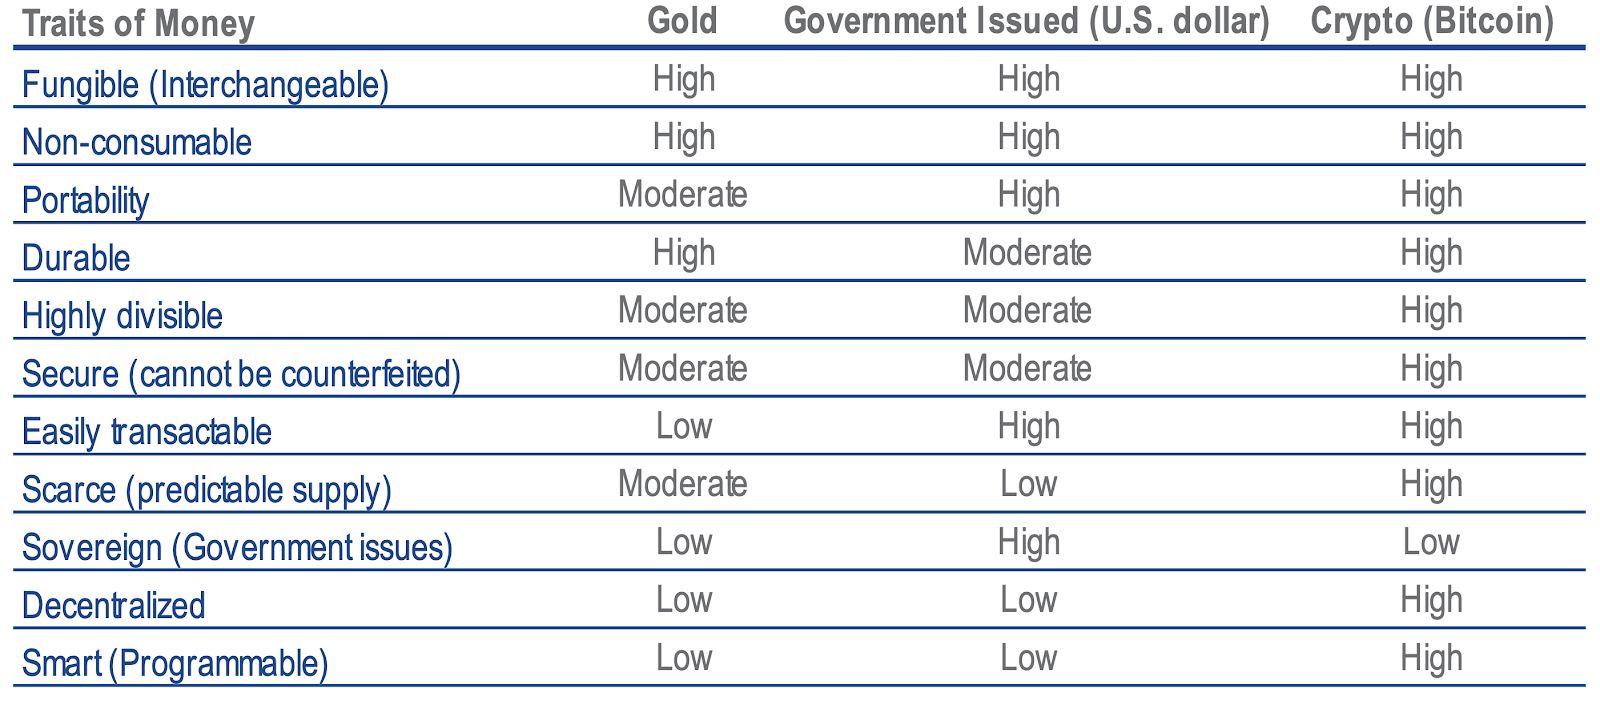 Comparison of the traits of money of Gold, United States dollars and Bitcoin